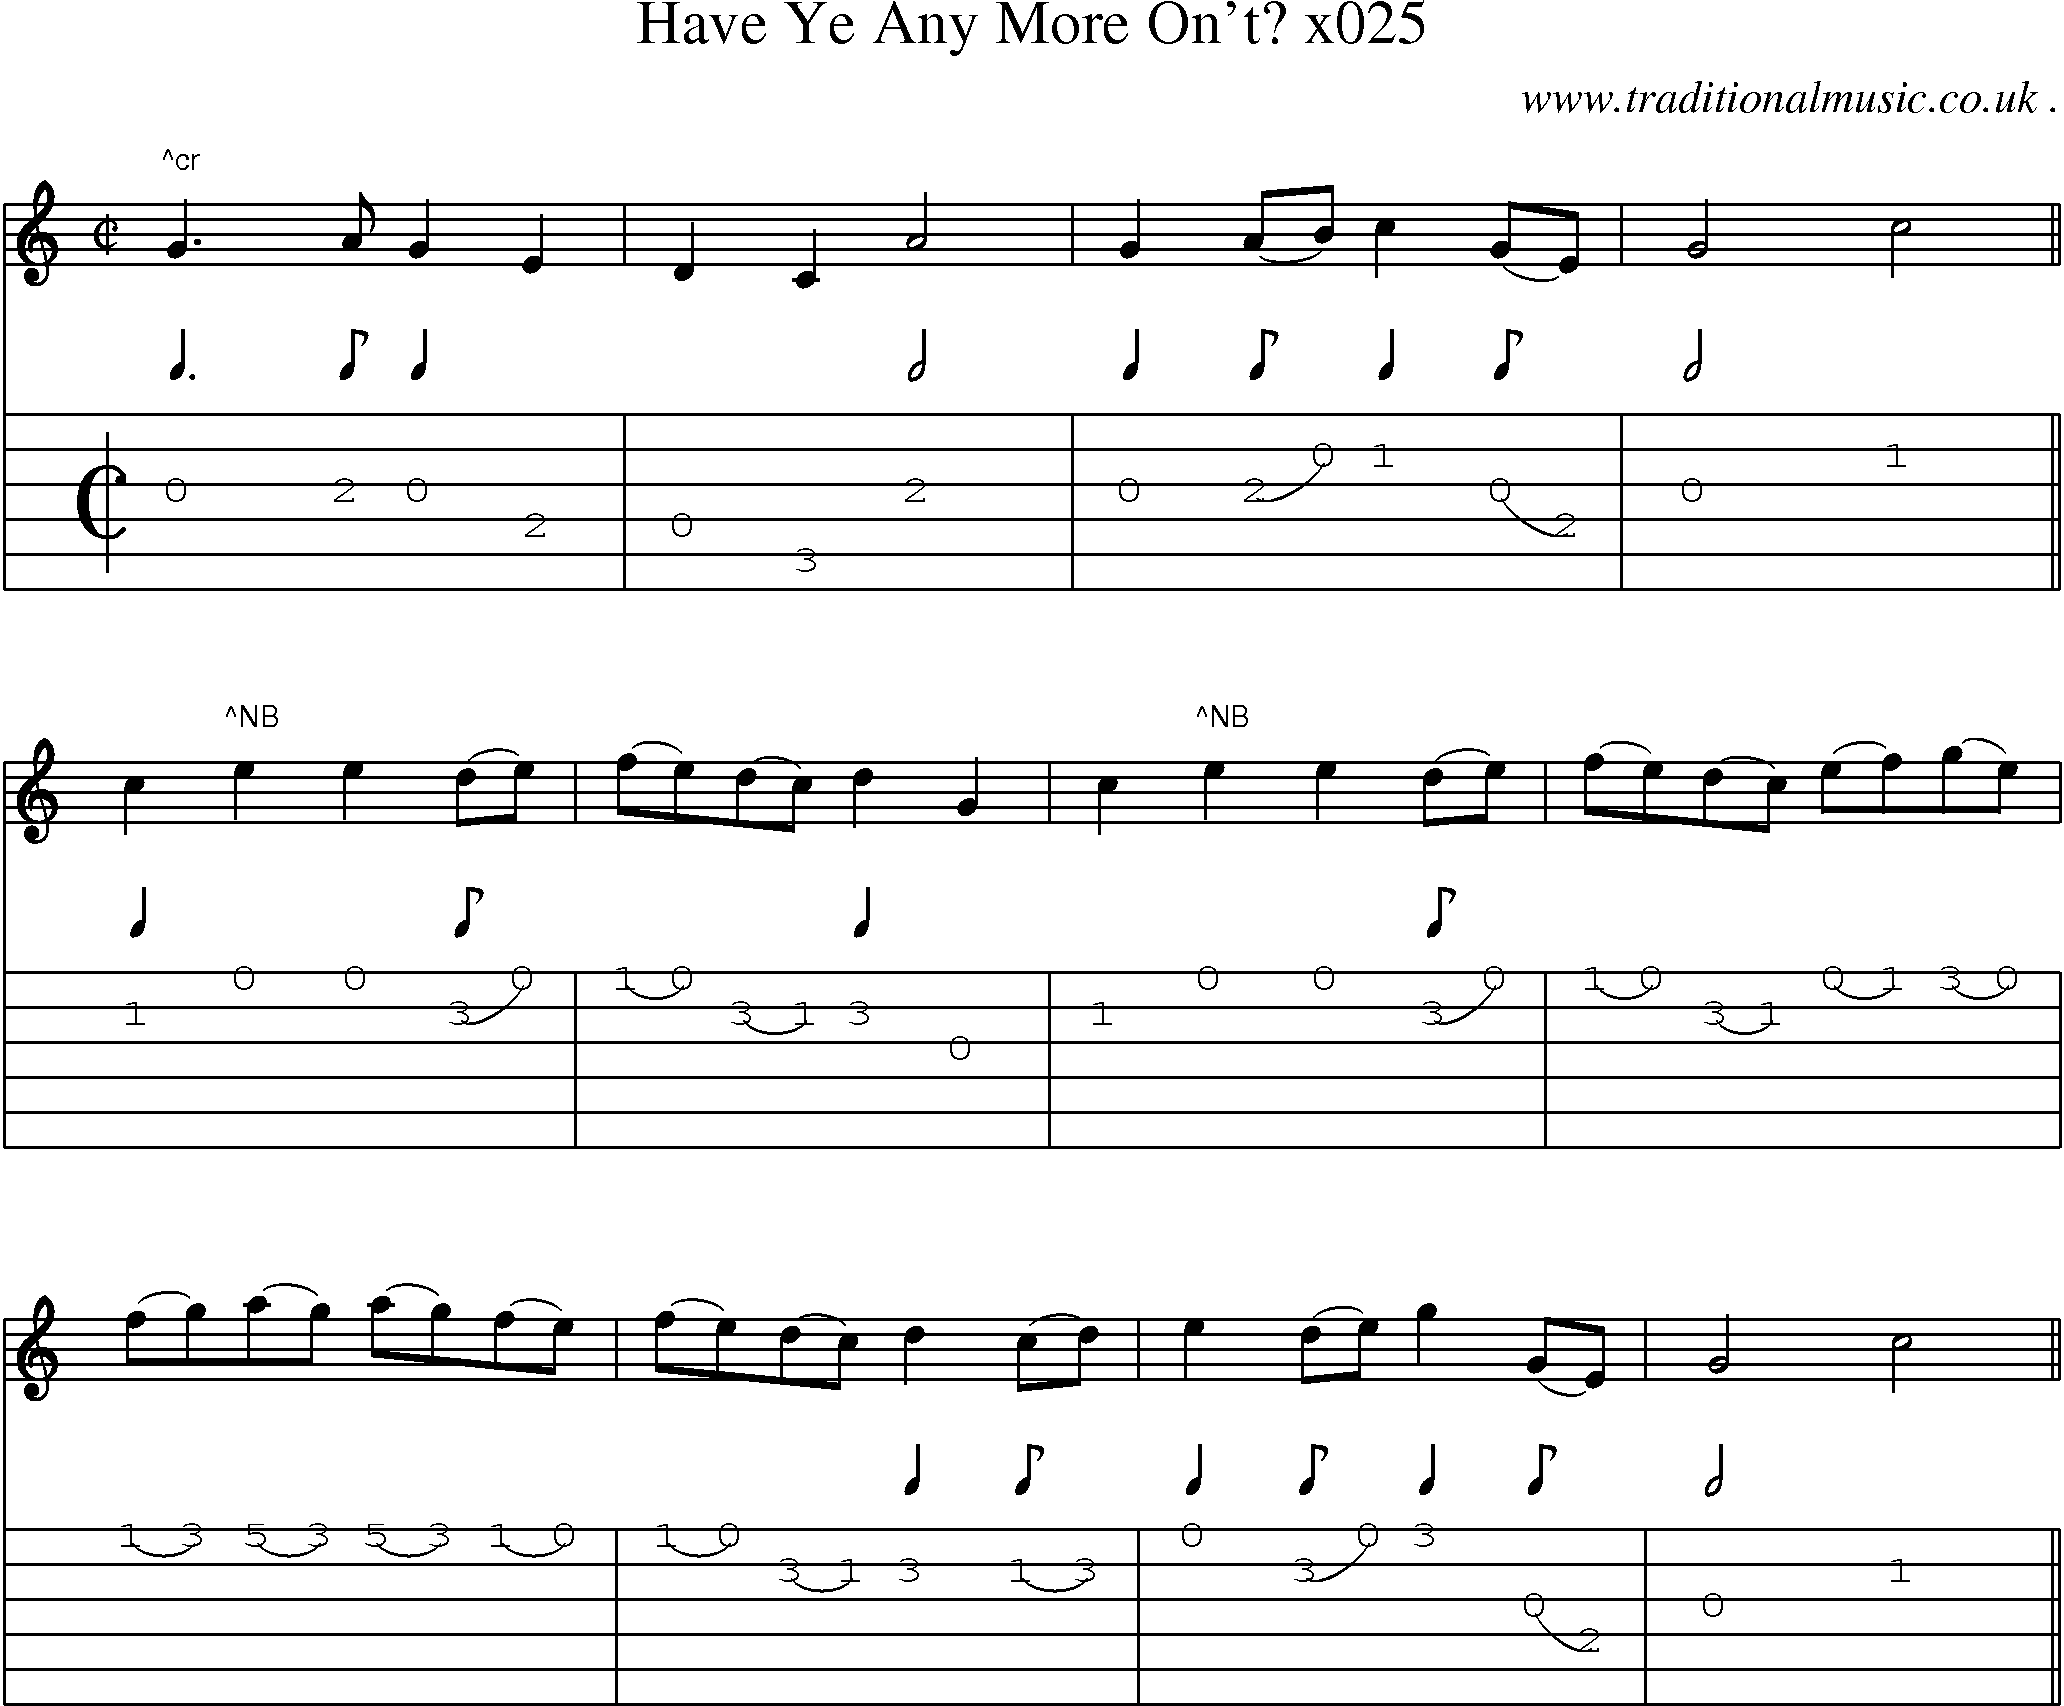 Sheet-Music and Guitar Tabs for Have Ye Any More Ont X025